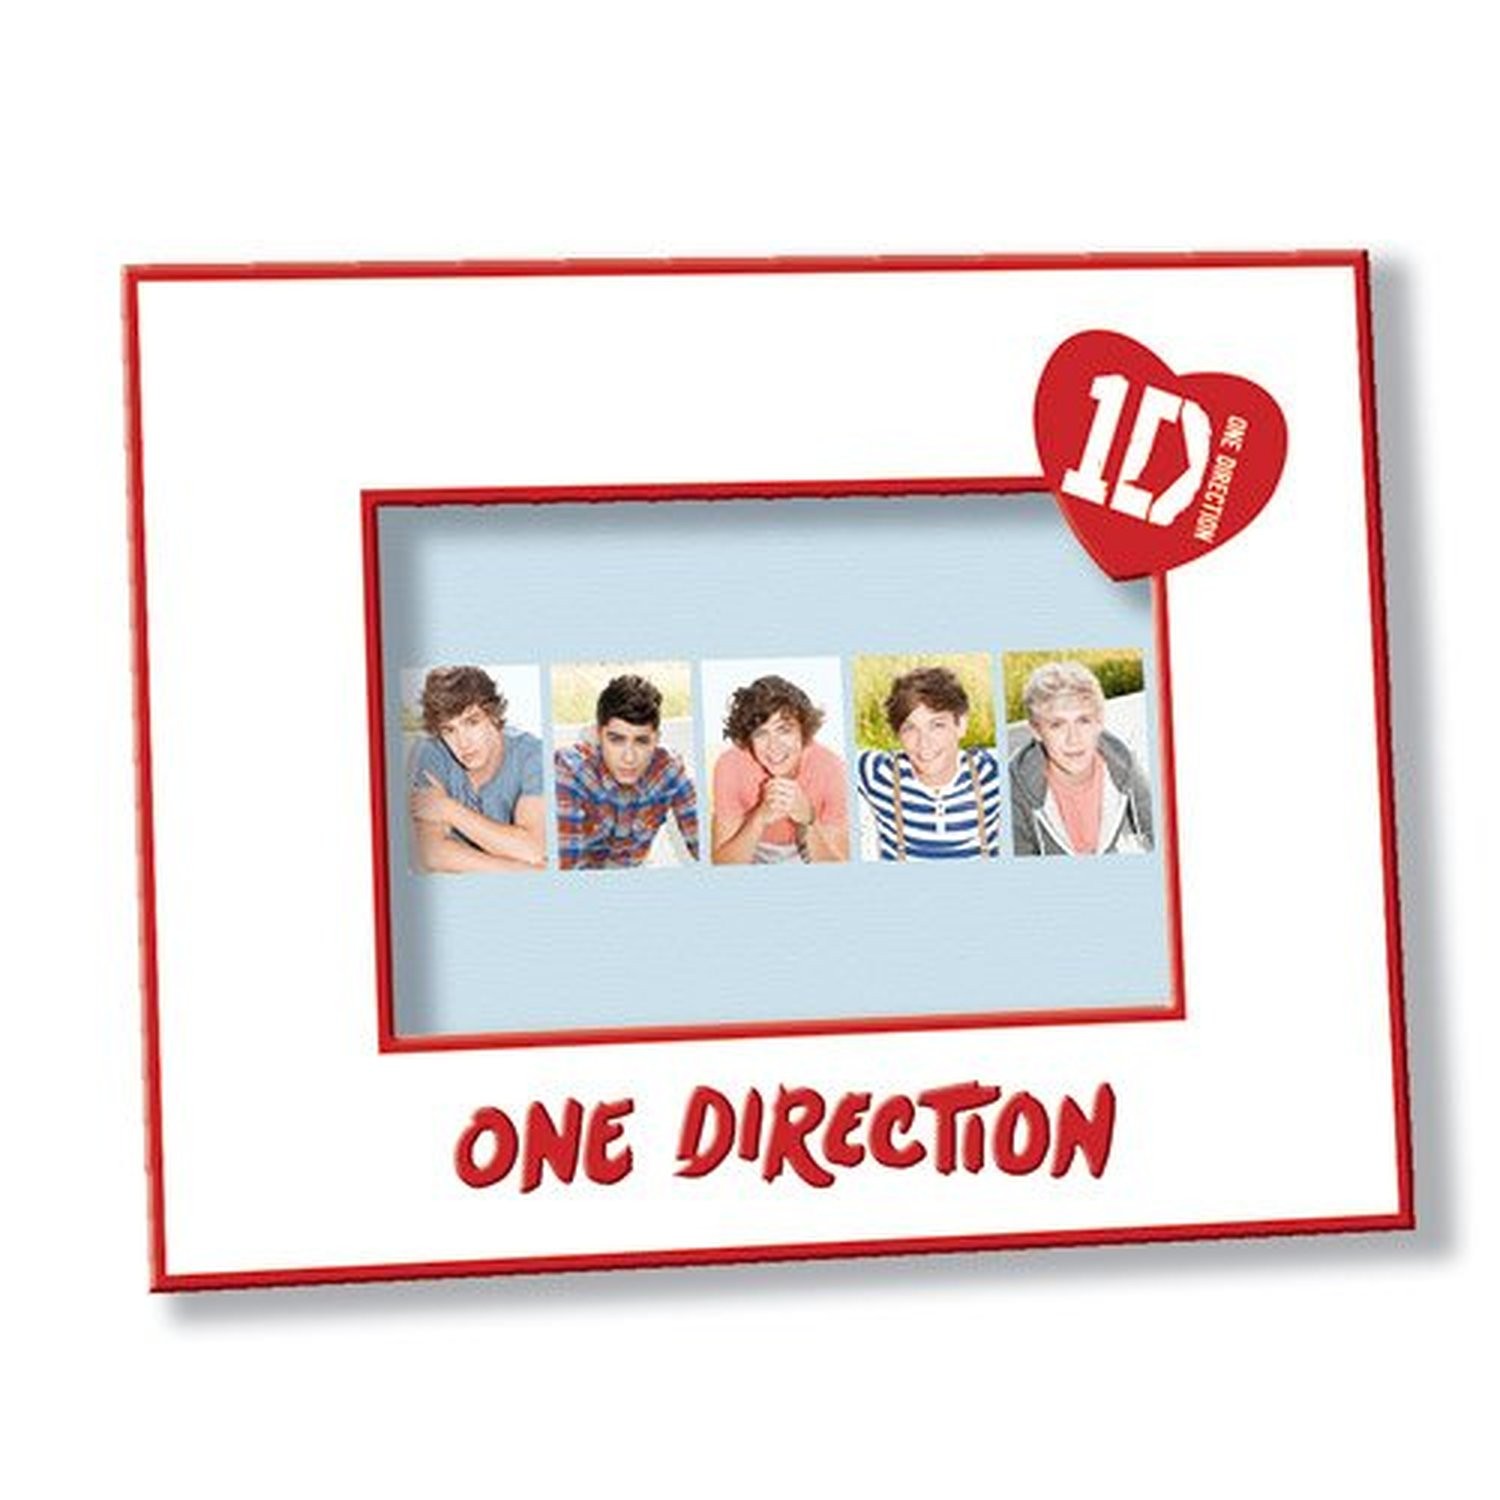 1D One Direction White Photo Picture Frame Heart Band Logo 17 x 13cm Official